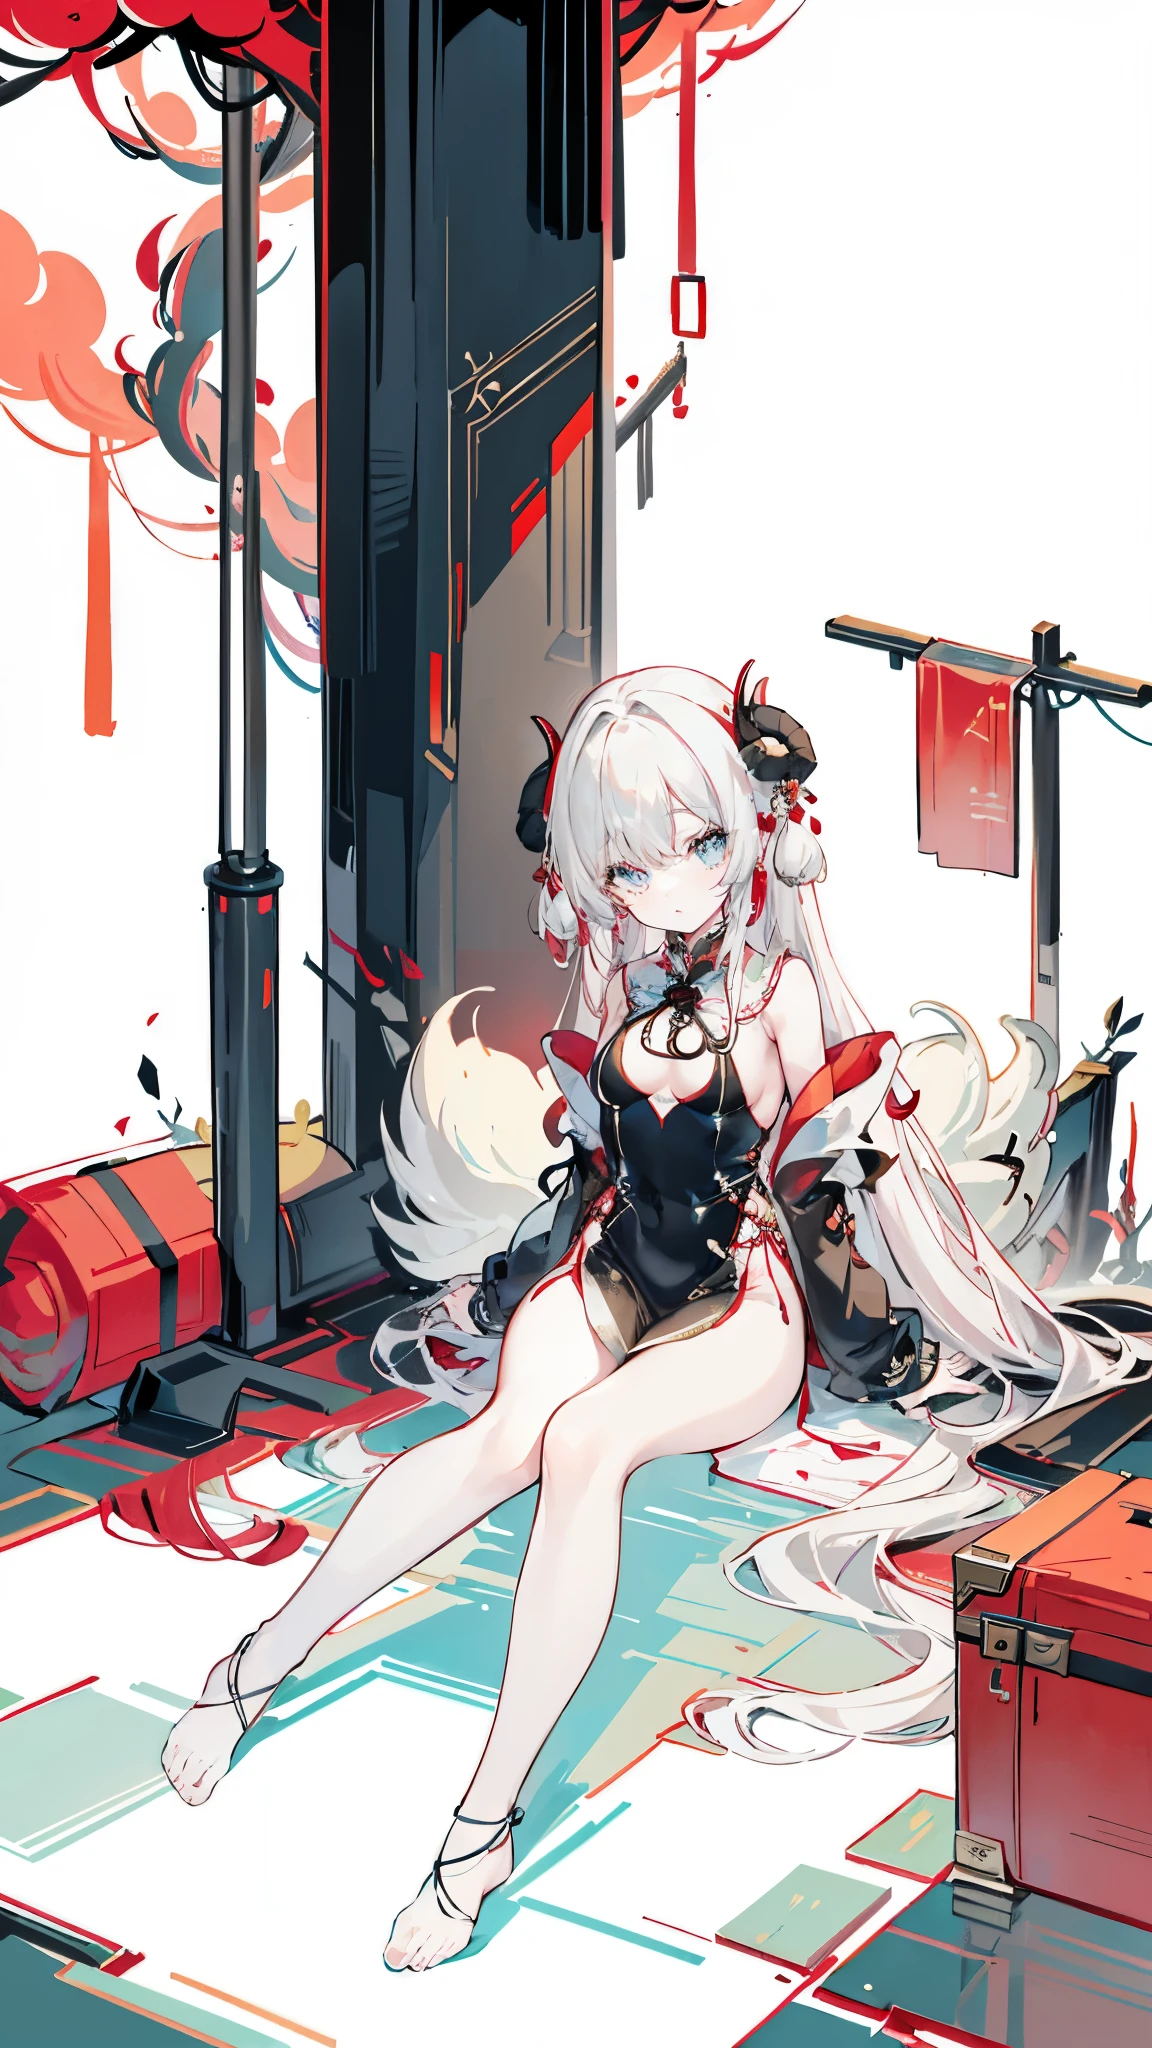 a girl，Sheep&#39;s horn, full color,  long white hair, Red eyes ，Eyeliner,  black transparent clothes, Red, open air, Rose, night, ruins, Butterfly，mine same as the original, mine, , (:1.2)
rest, (cheongsam), (view from below), (Put your arms behind your back), (wild lift), thin dress, Crotch cutout, 
rest looking at viewer, 
rest, Home,
rest (masterpiece:1.2), best quality, high resolution, unified 8k wallpaper, (illustration:0.8), (Beautiful and delicate eyes:1.6), extremely detailed face, perfect lighting, Very detailed cg, (perfect hands, perfect anatomy),soles of feet，sitting，blond，red lips，Temperament